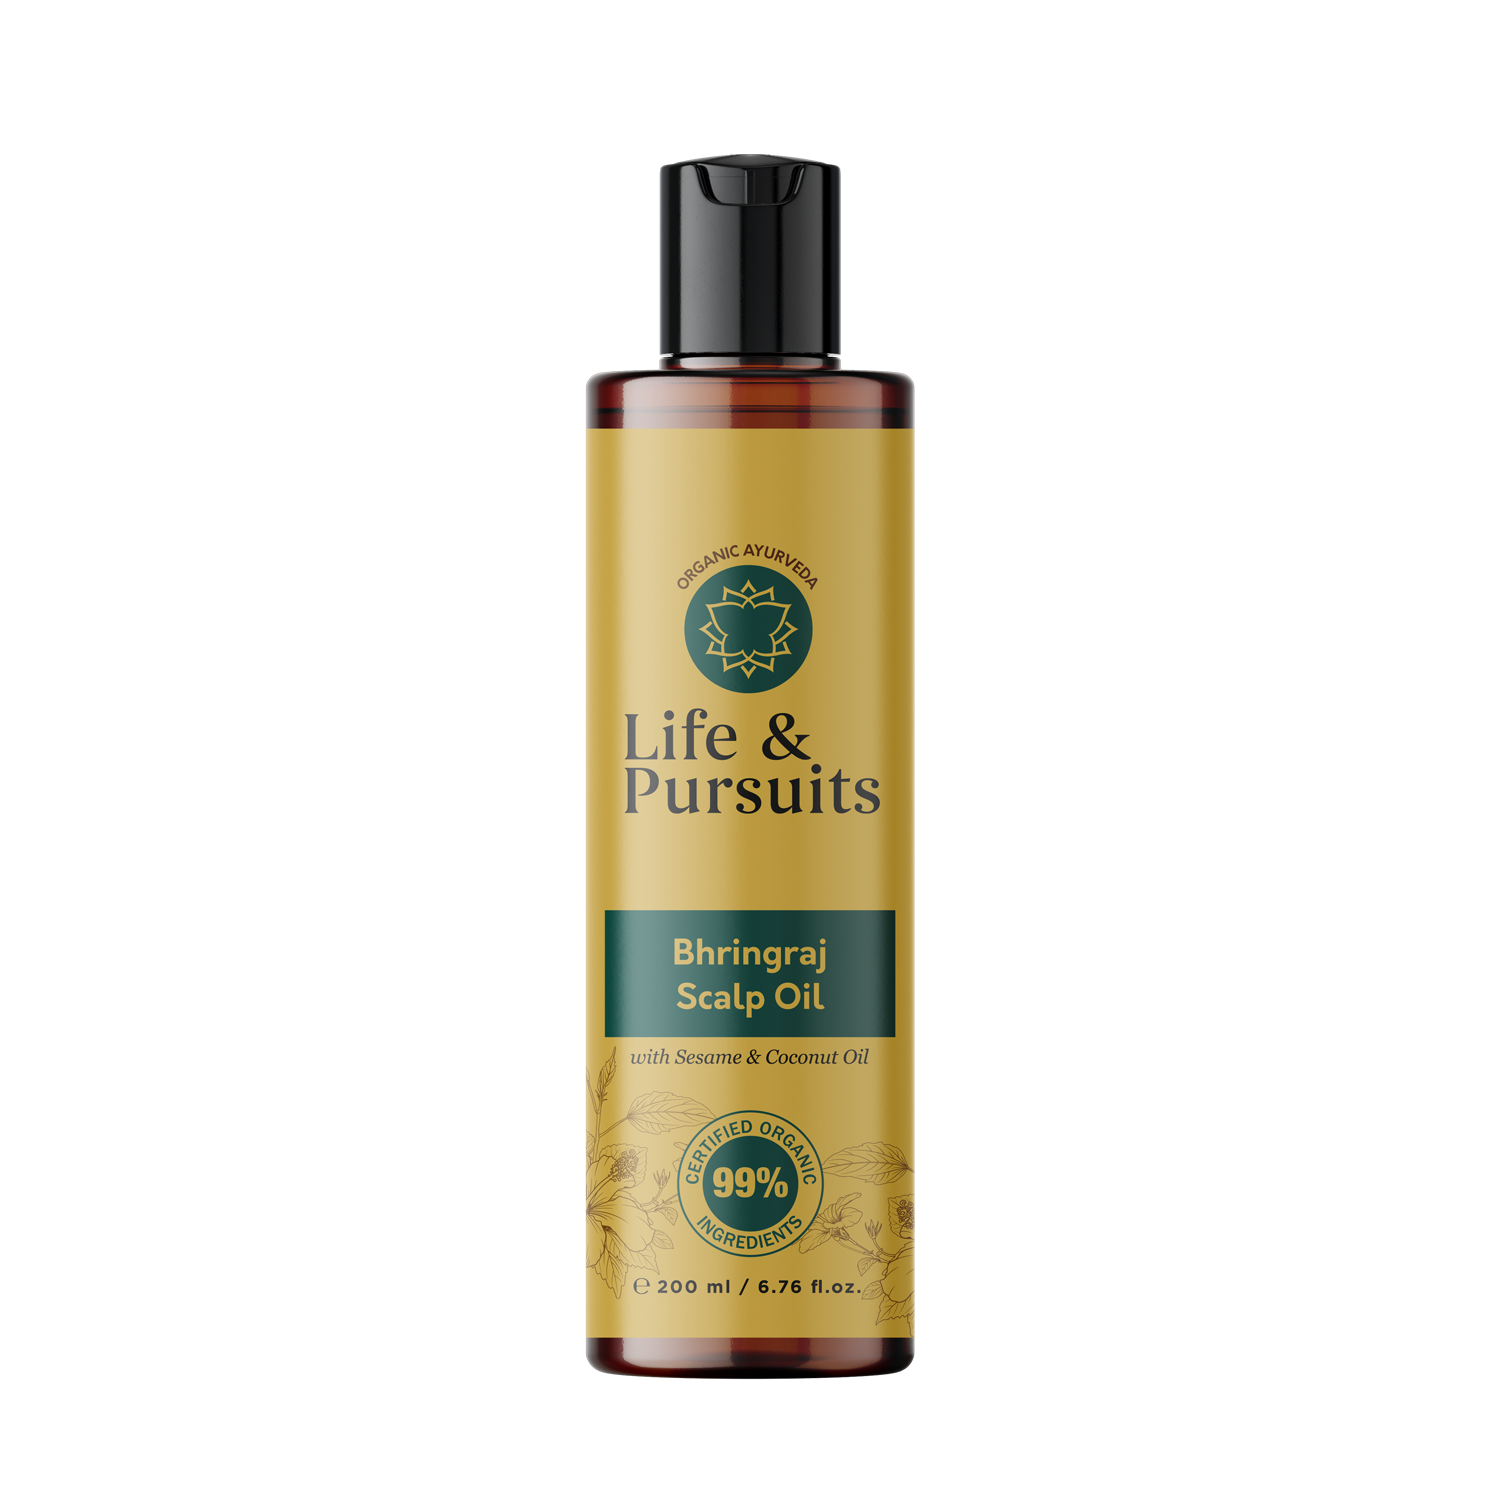 Say Hello to Nourished Hair with Life & Pursuits’ Organic Bhringraj ...